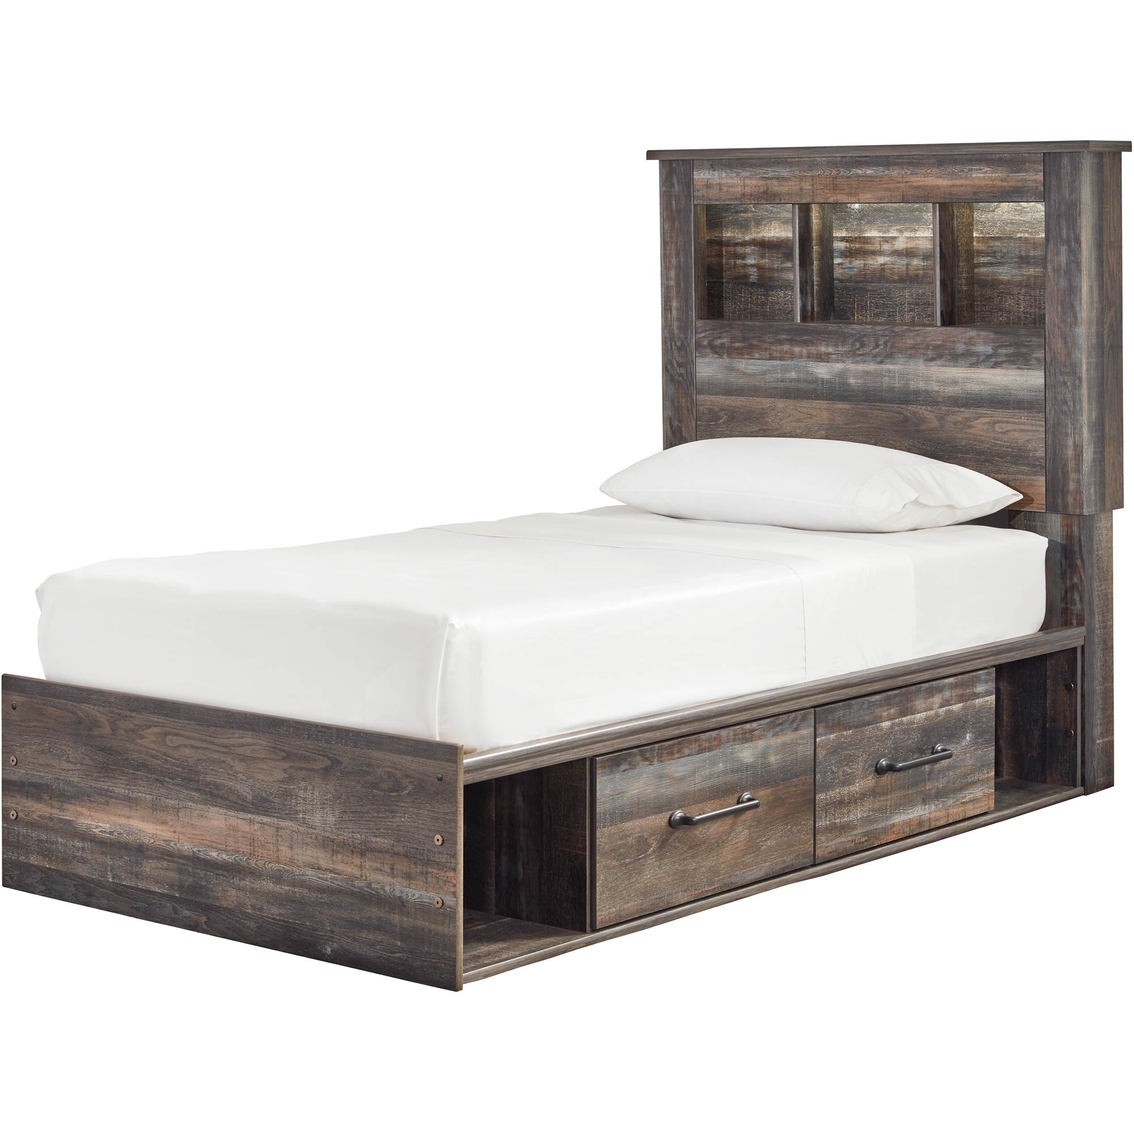 Signature Design by Ashley Drystan Bookcase Headboard Bed with 2 Side Storage Units - Image 5 of 8